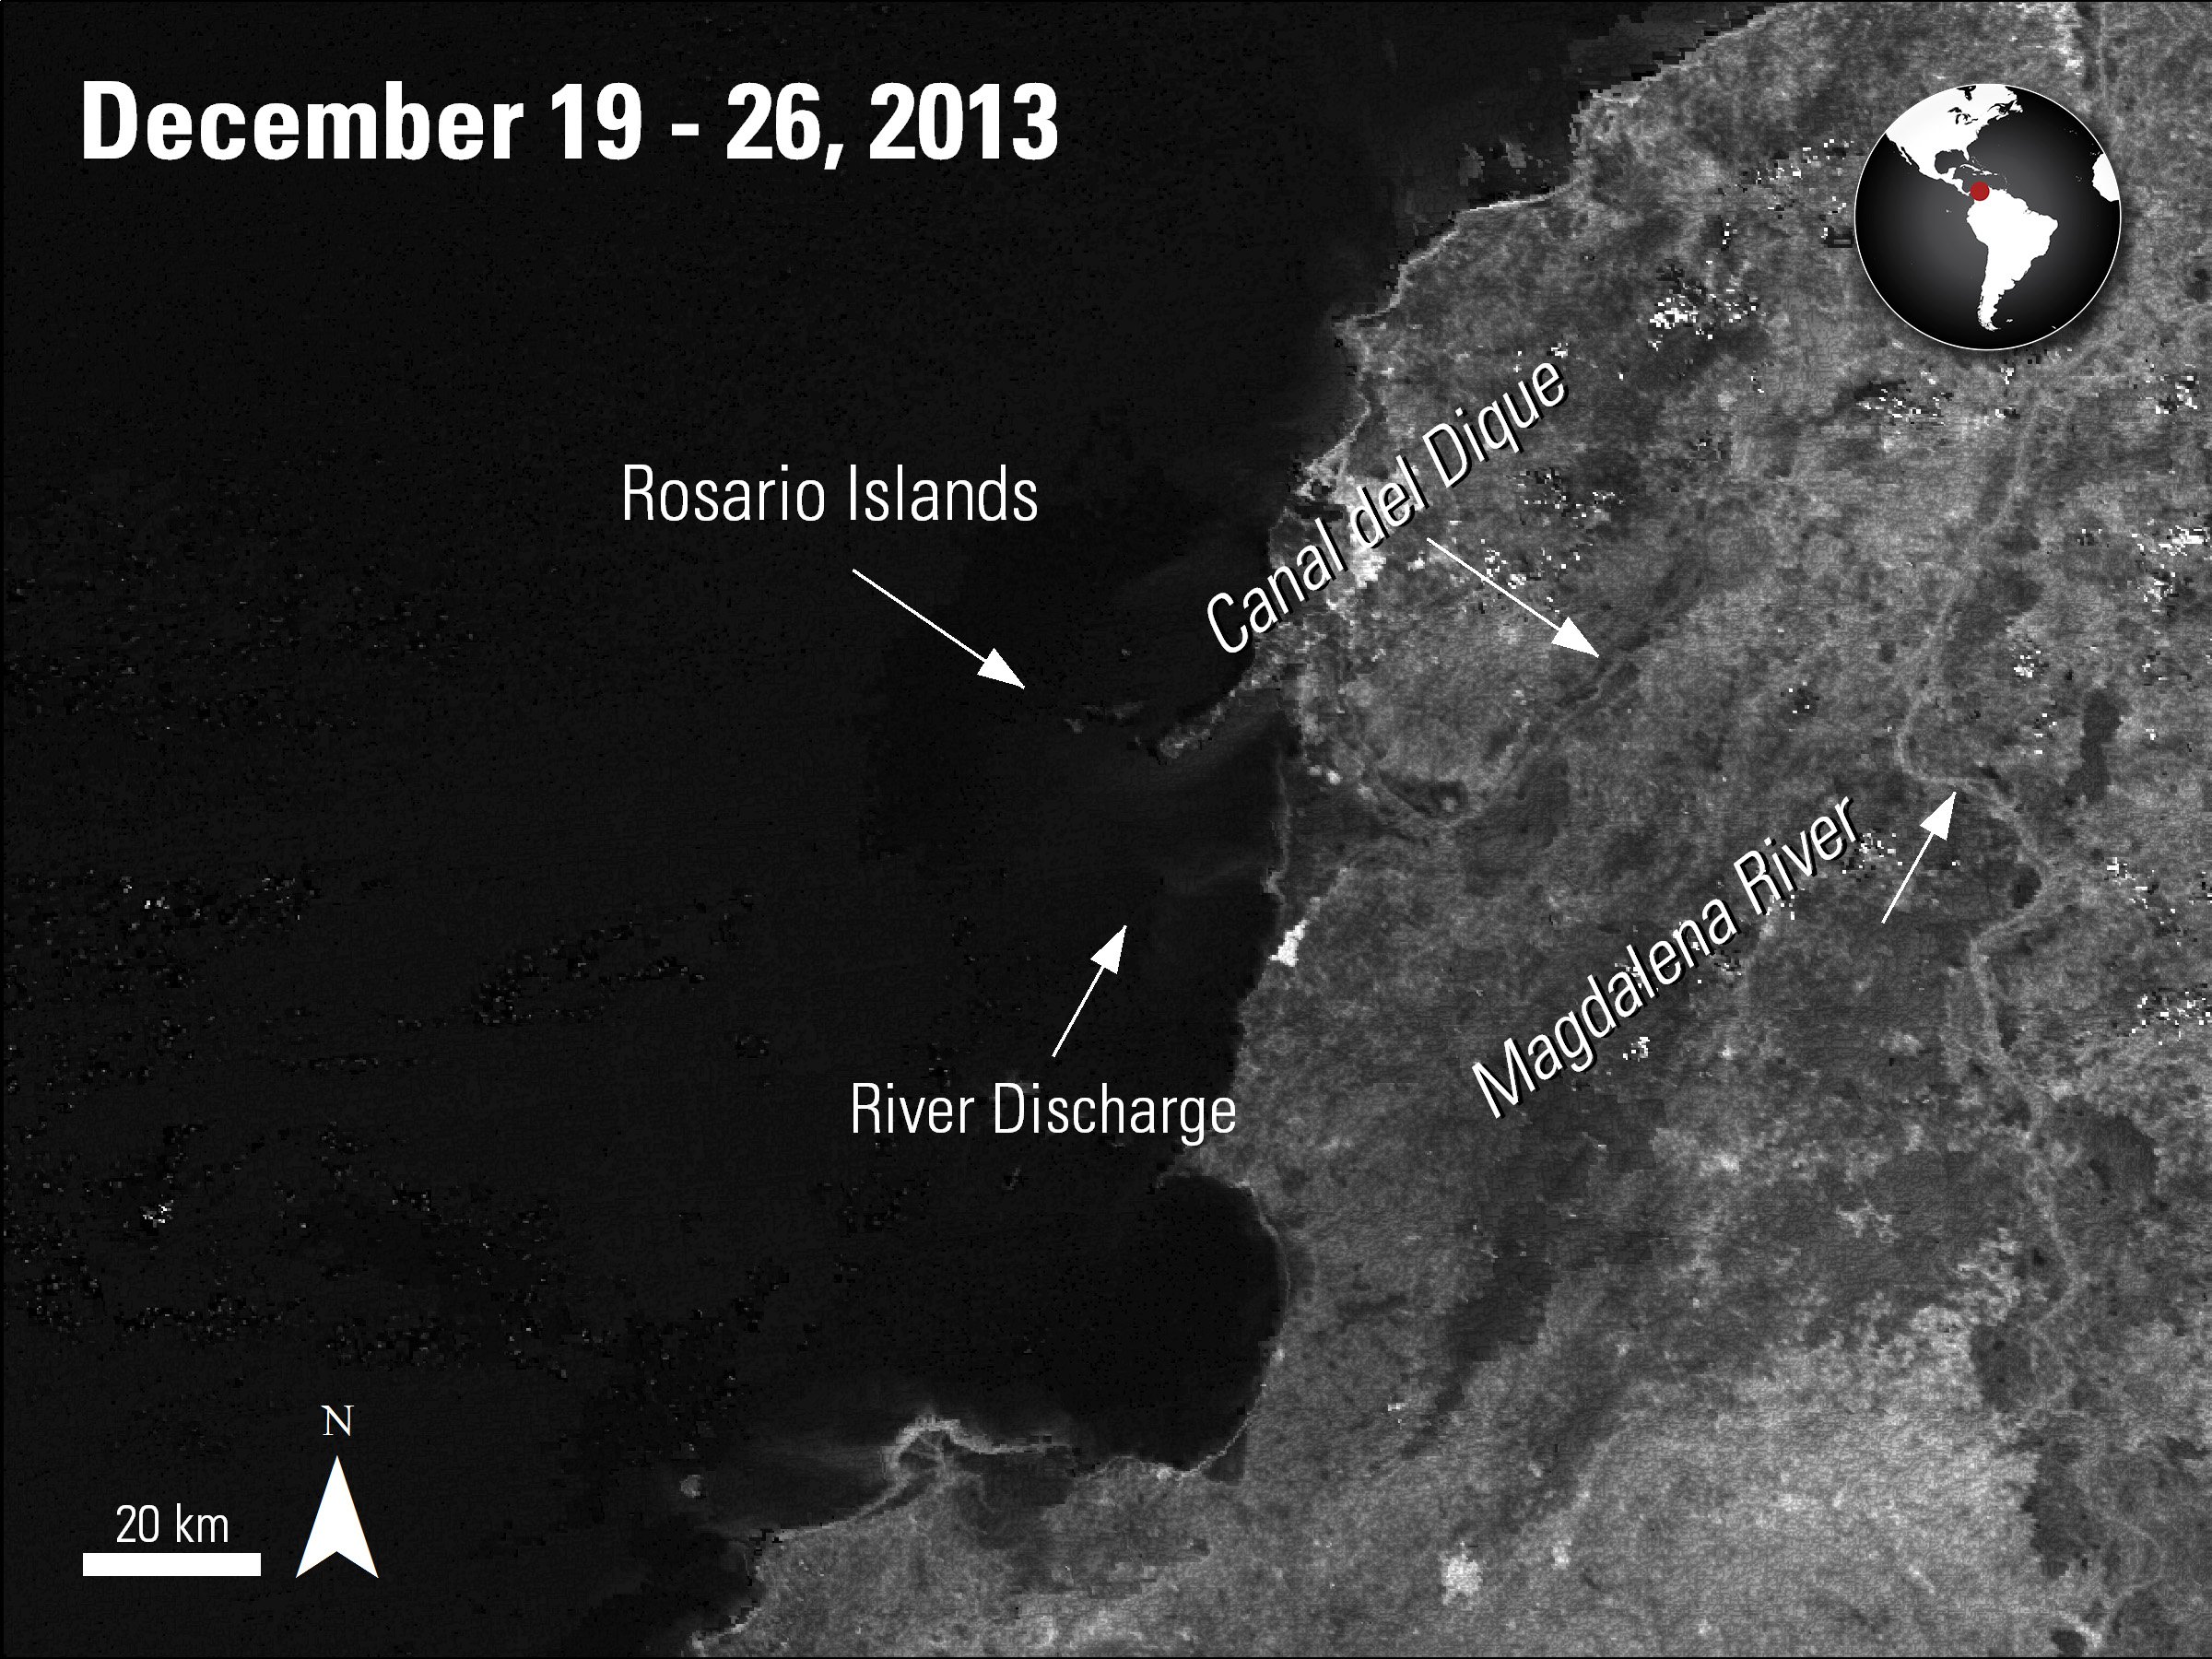 Aqua MODIS Surface Reflectance data (MYD09Q1) over the Magdalena River, Rosario Islands, acquired January 19 to 26, 2013.